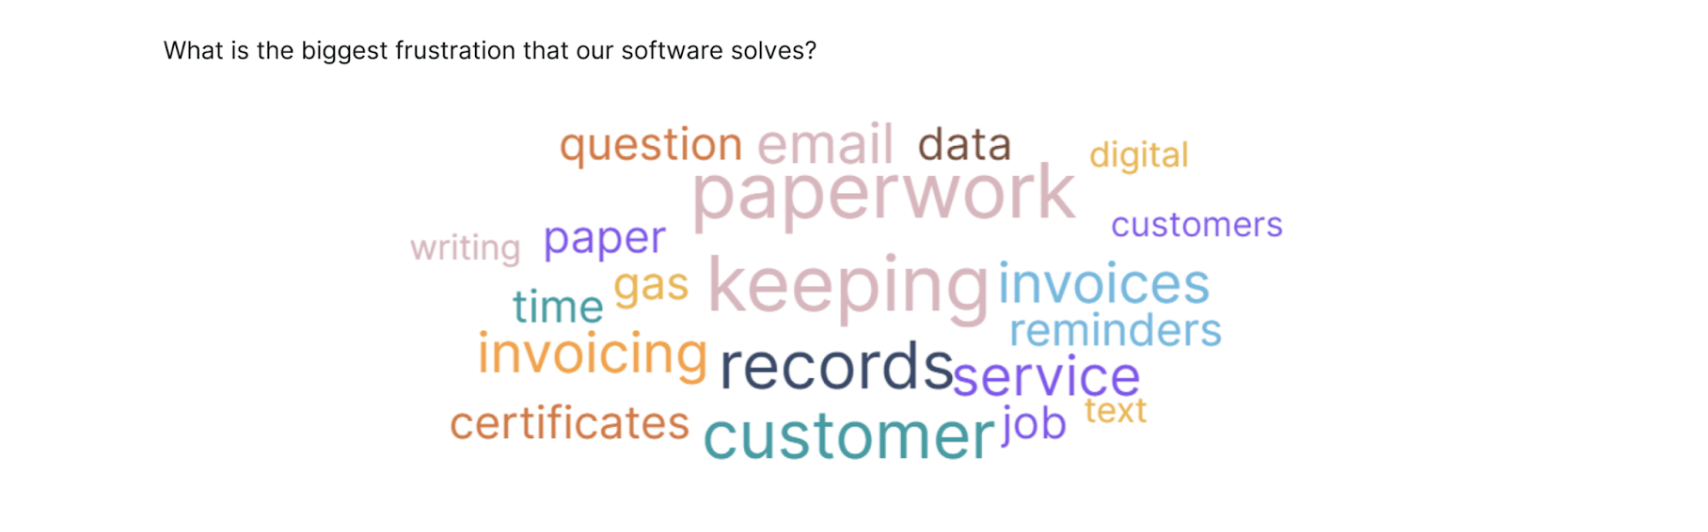 A wordcloud of responses to the question "what is the biggest frustration that software solves"